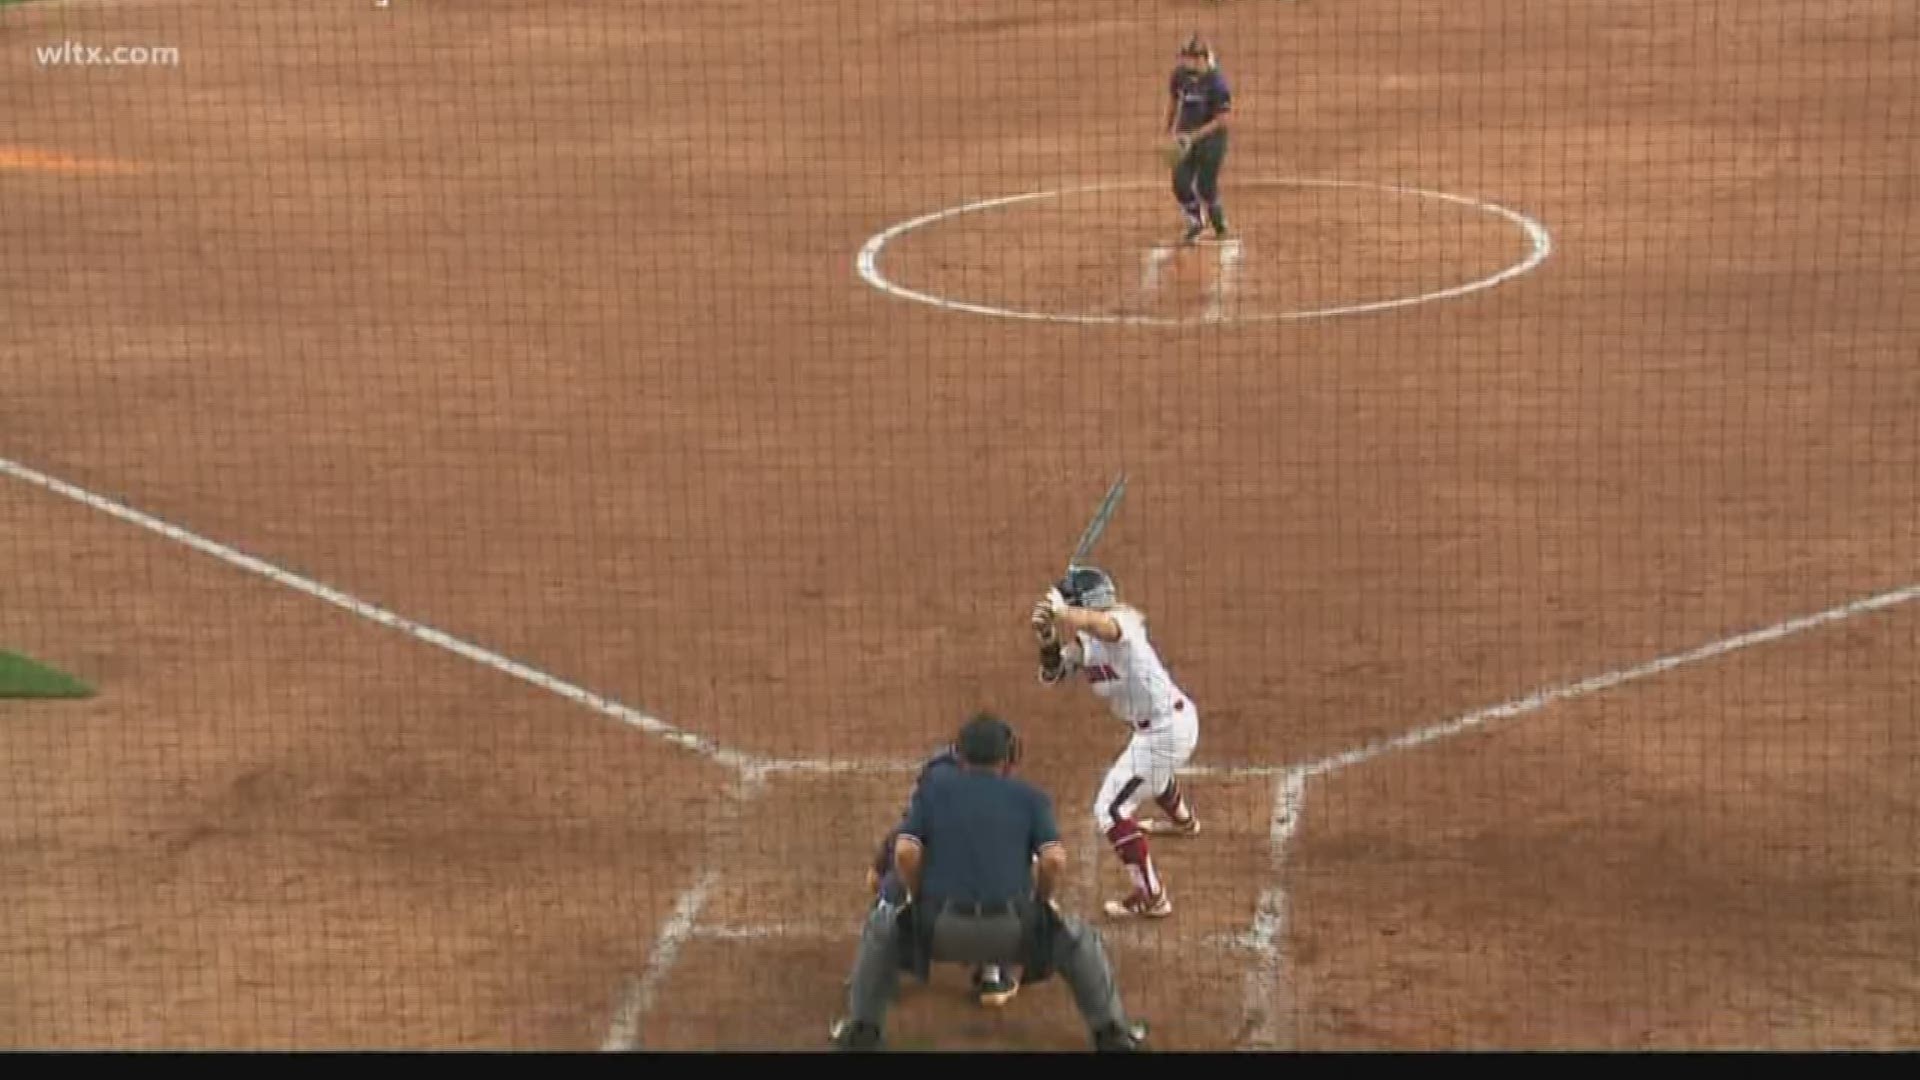 The USC softball team avoids the upset at the hands of a motivated Furman team